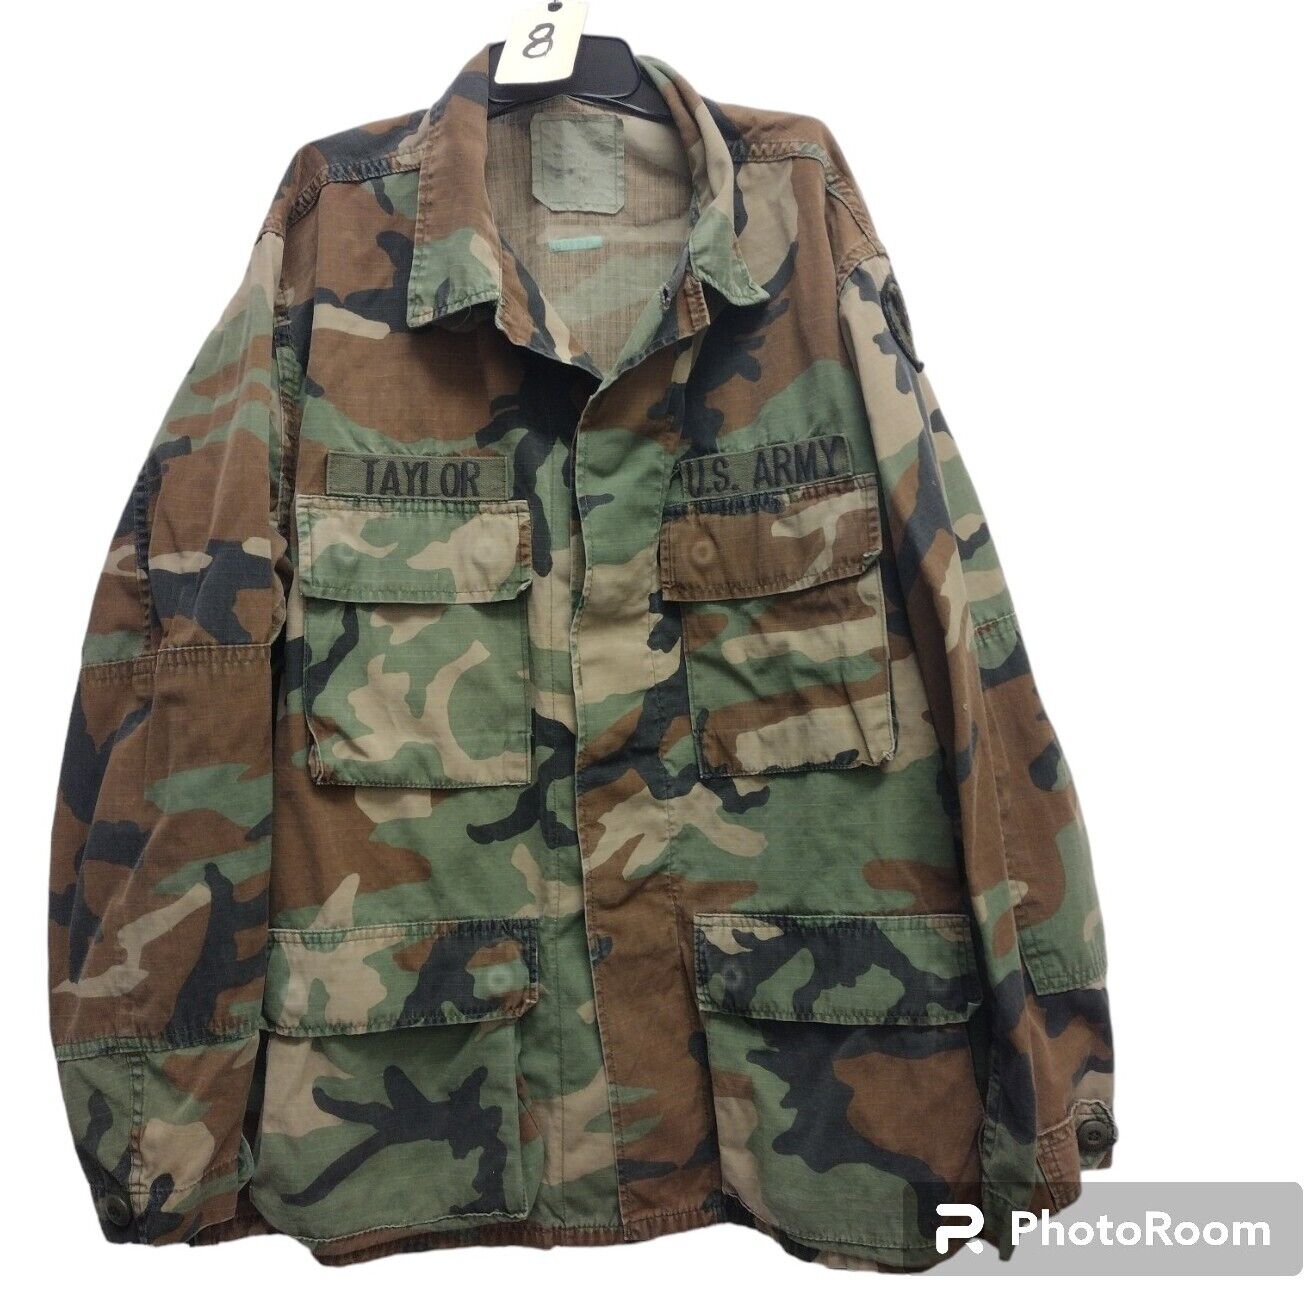 USGI Military BDU Camo Combat Shirt Blouse Patches Small Short Imperfections